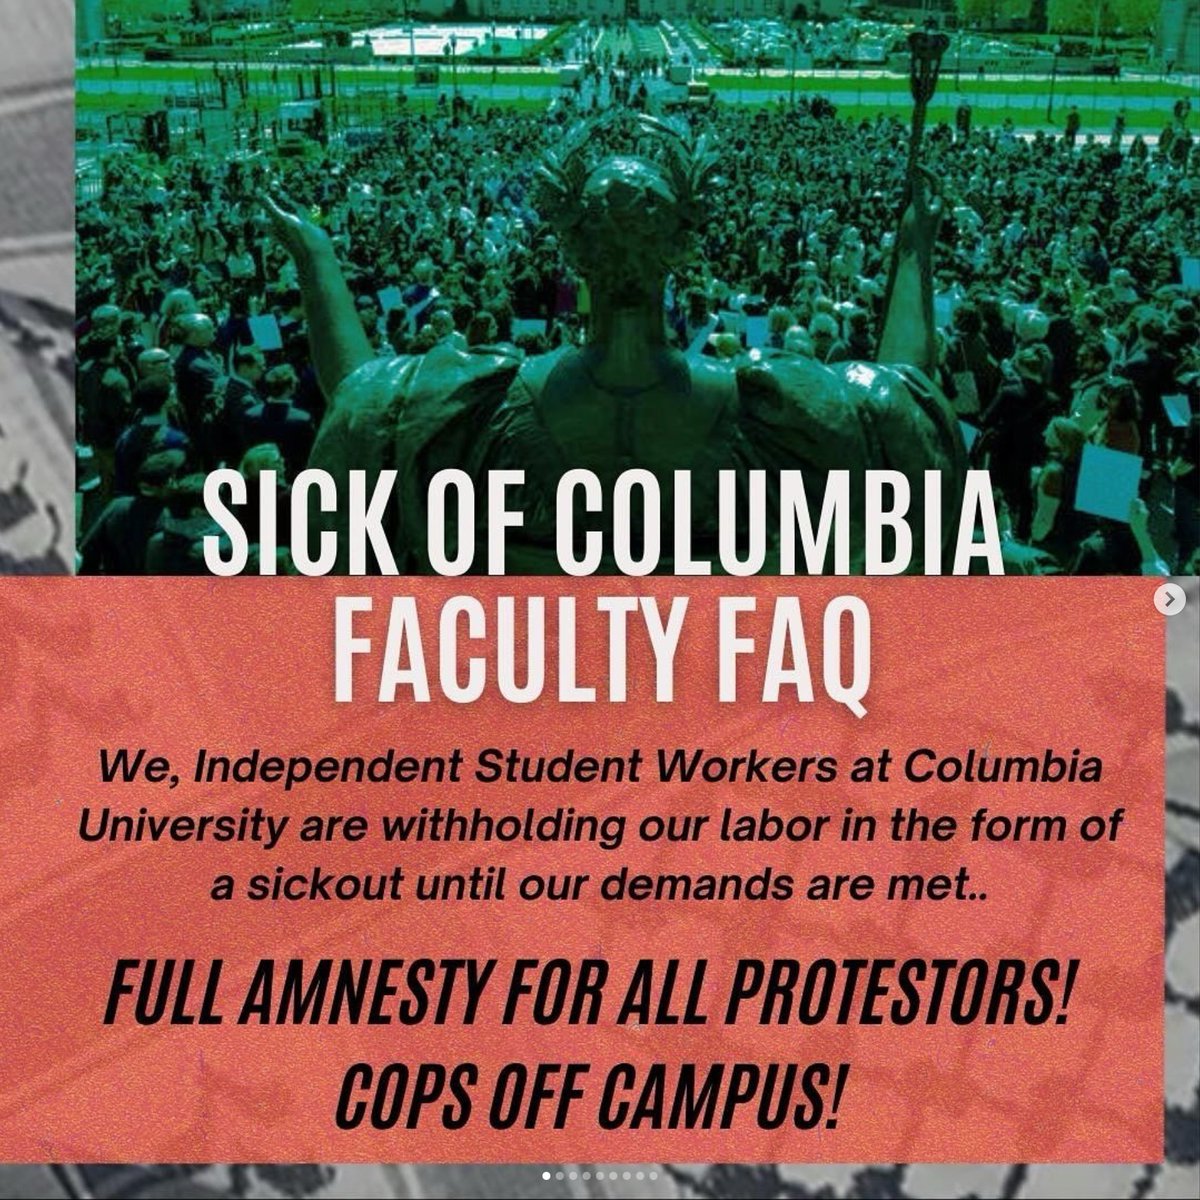 #GazaSolidarityEncampment #Labor4Palestine 🚨 Join Independent Student Workers in support of 1) full amnesty for all students, staff, and faculty facing disciplinary action and 2) *permanent* removal of cops off campus. instagram.com/p/C67UpT8sDDu/